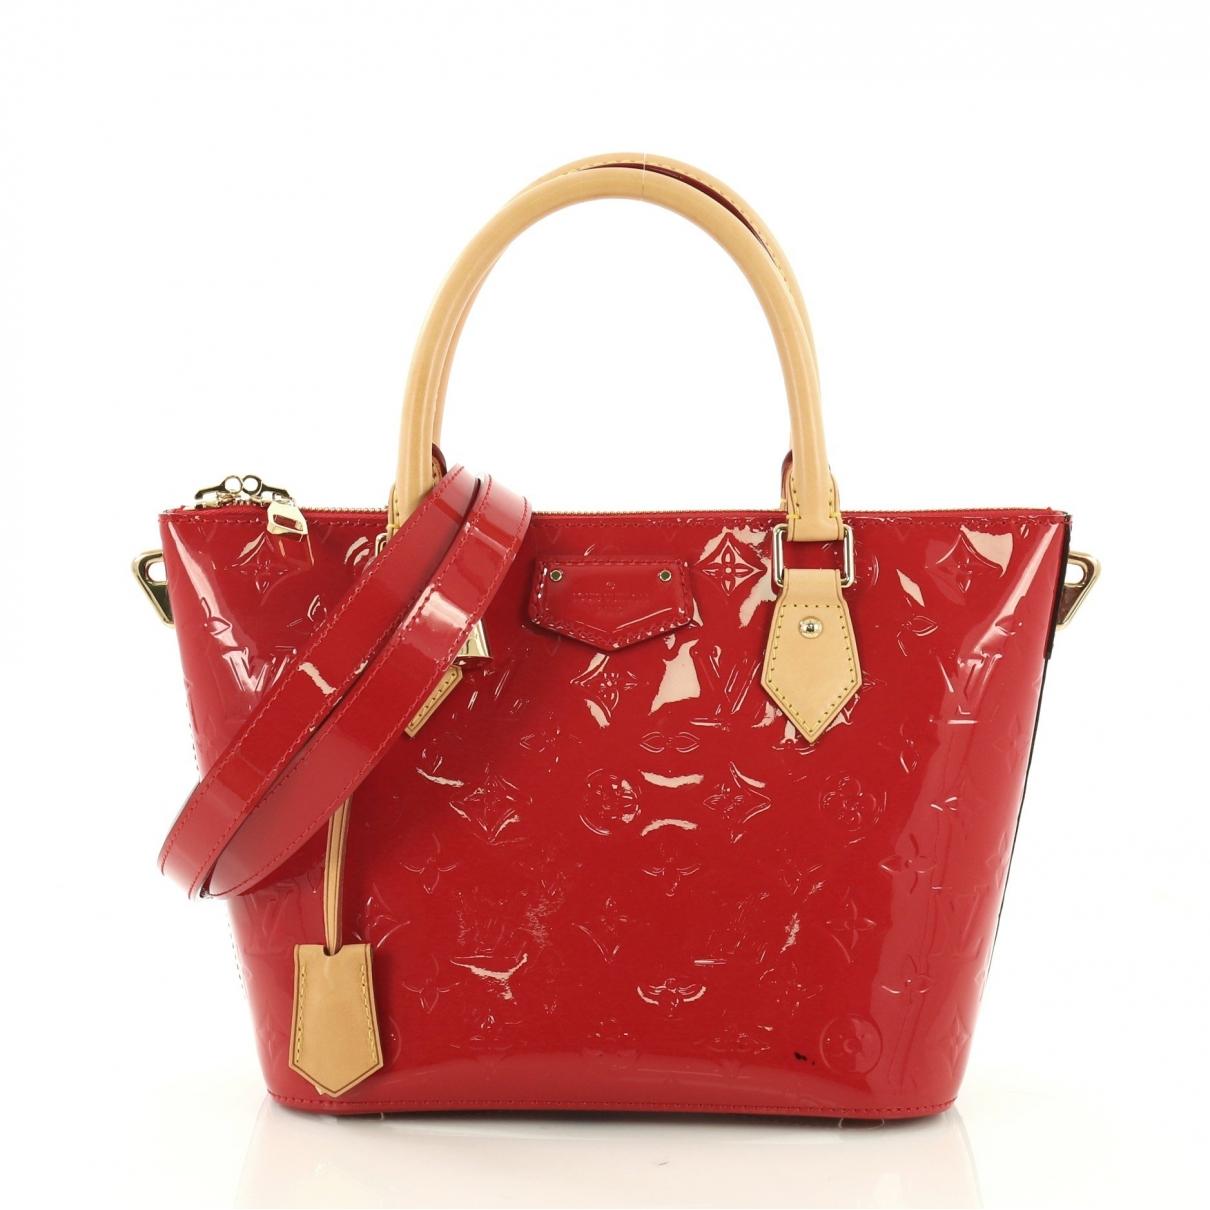 Louis Vuitton Patent Leather Tote Bags For Women | semashow.com